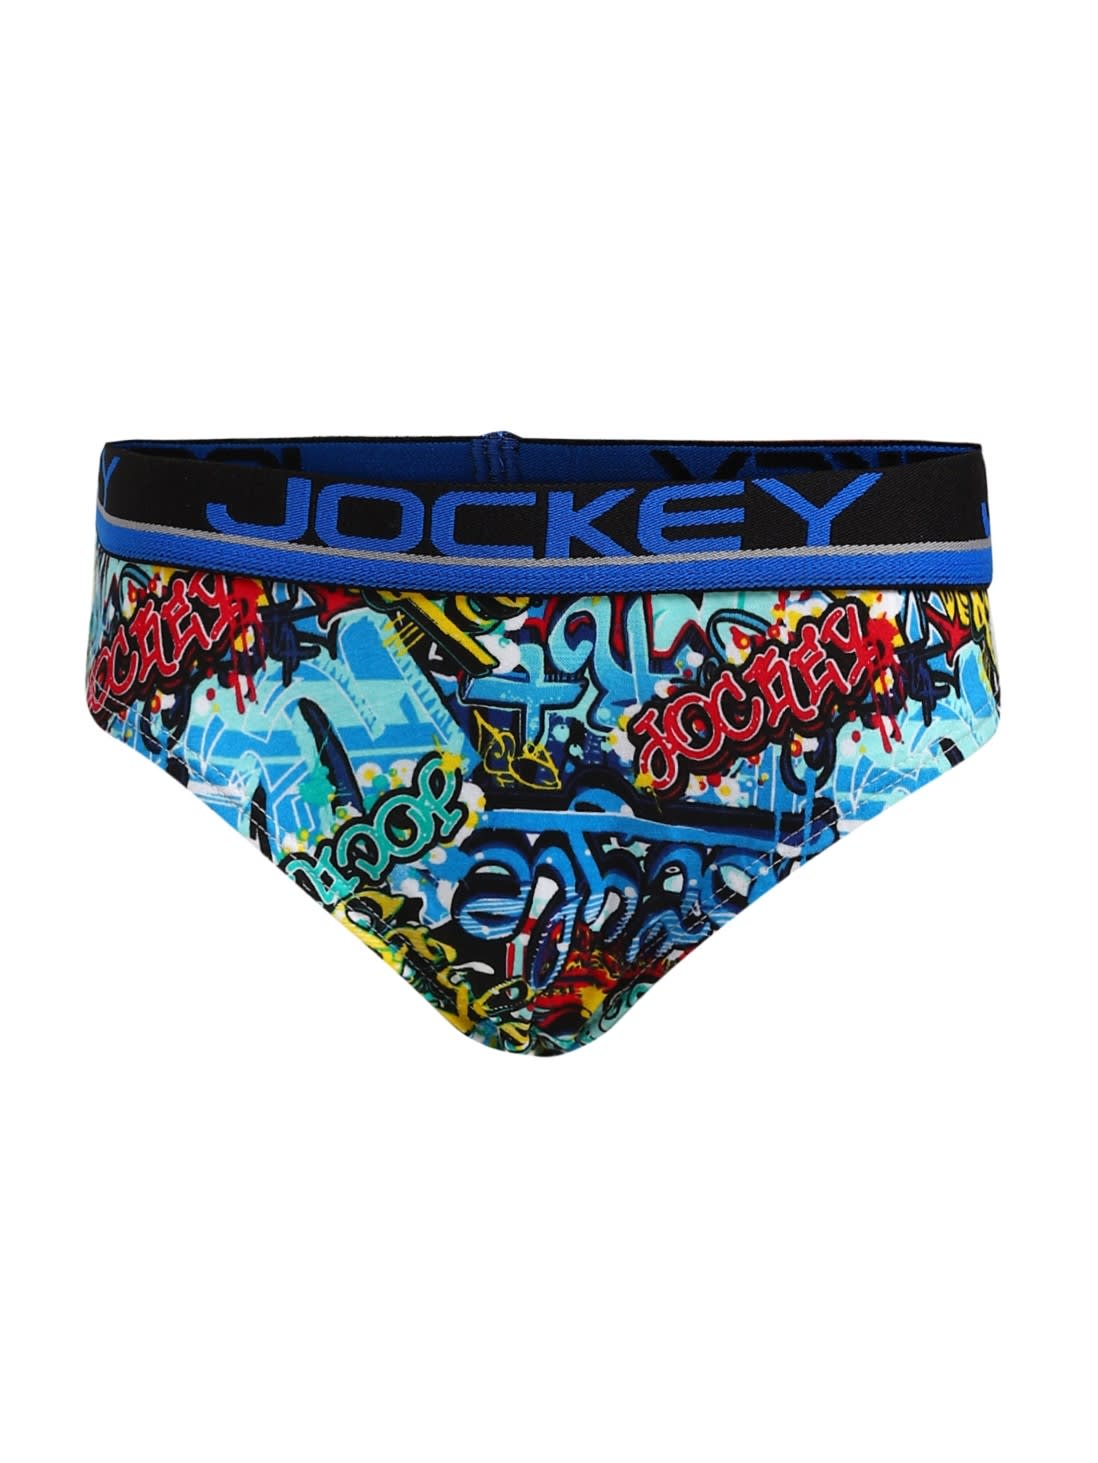 Buy Assorted Color & Prints Boys Briefs with Exposed Elastic Waistband ...